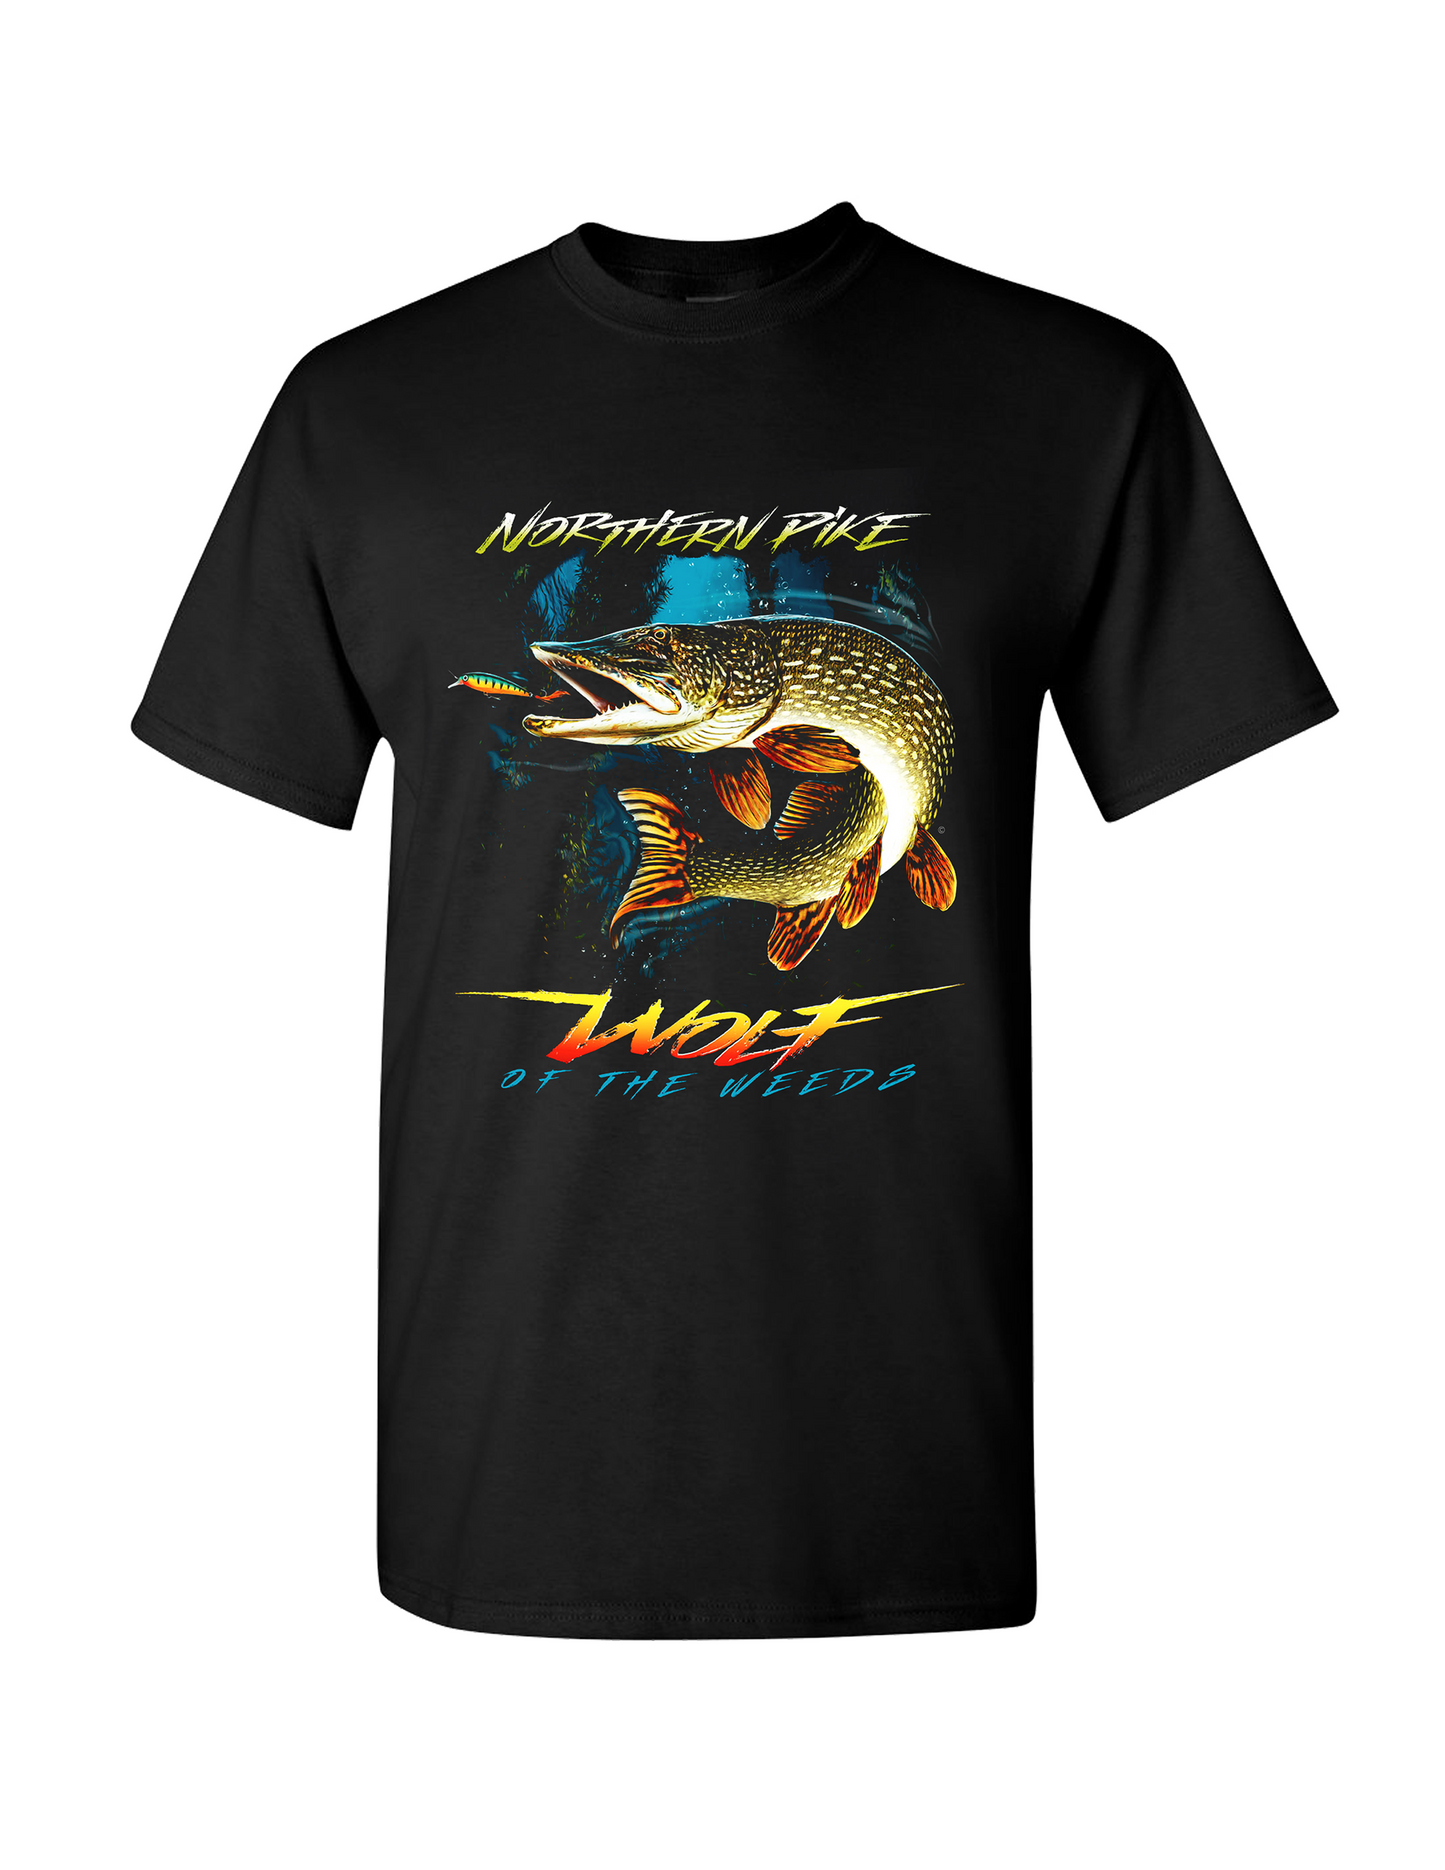 Northern Pike “Wolf of the Weeds” Short Sleeve T-shirt